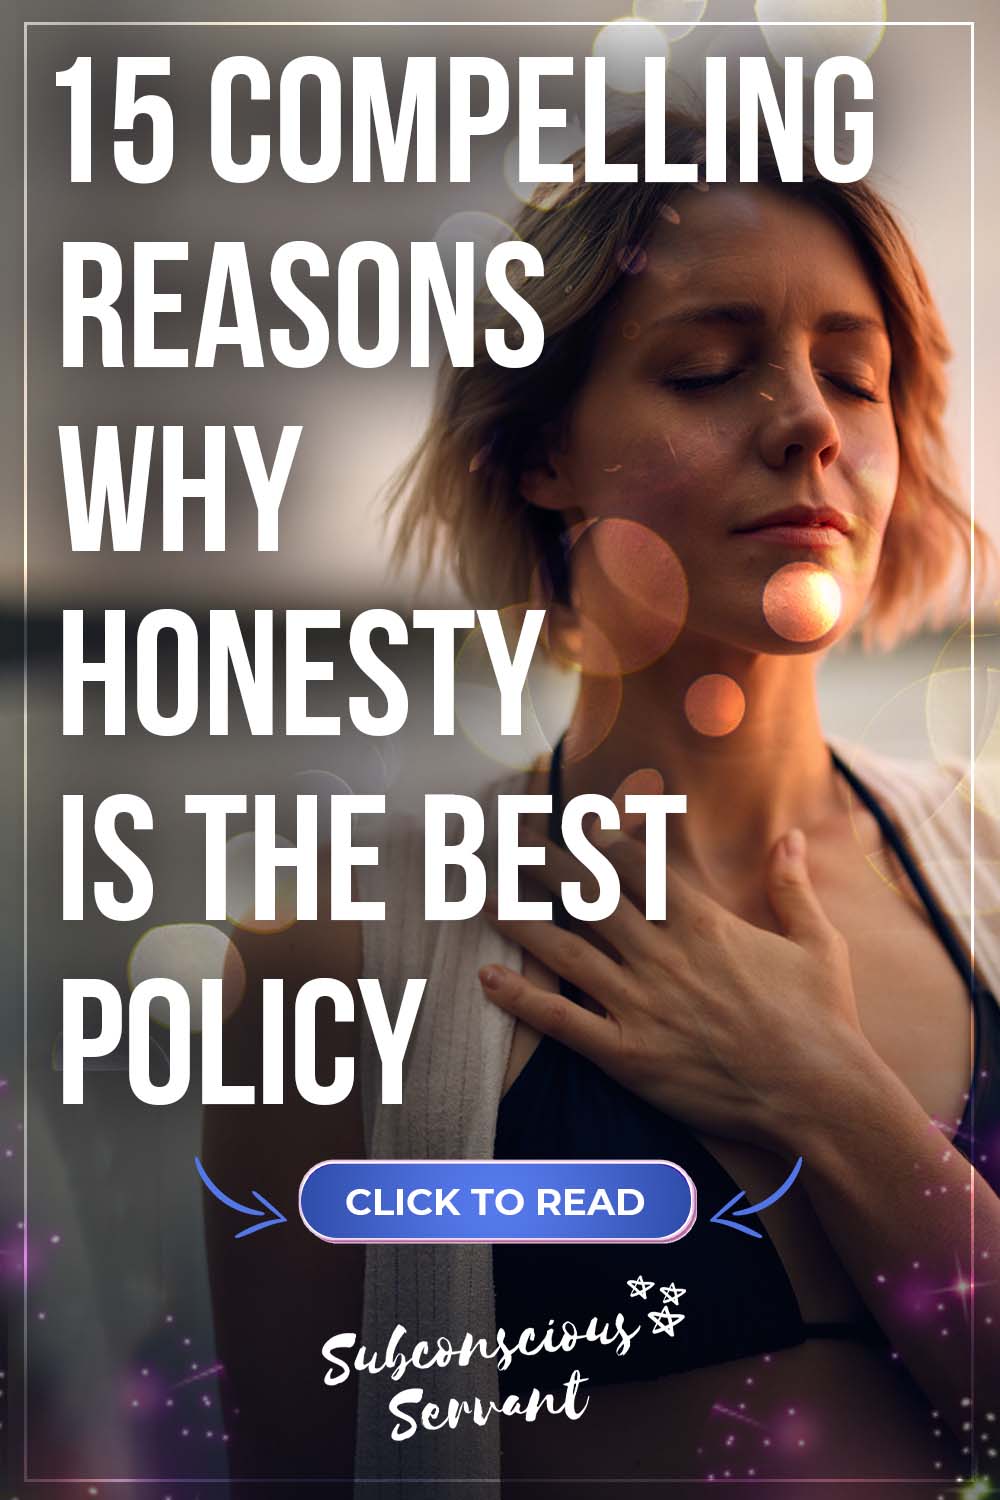 15 Compelling Reasons Why Honesty Is The Best Policy